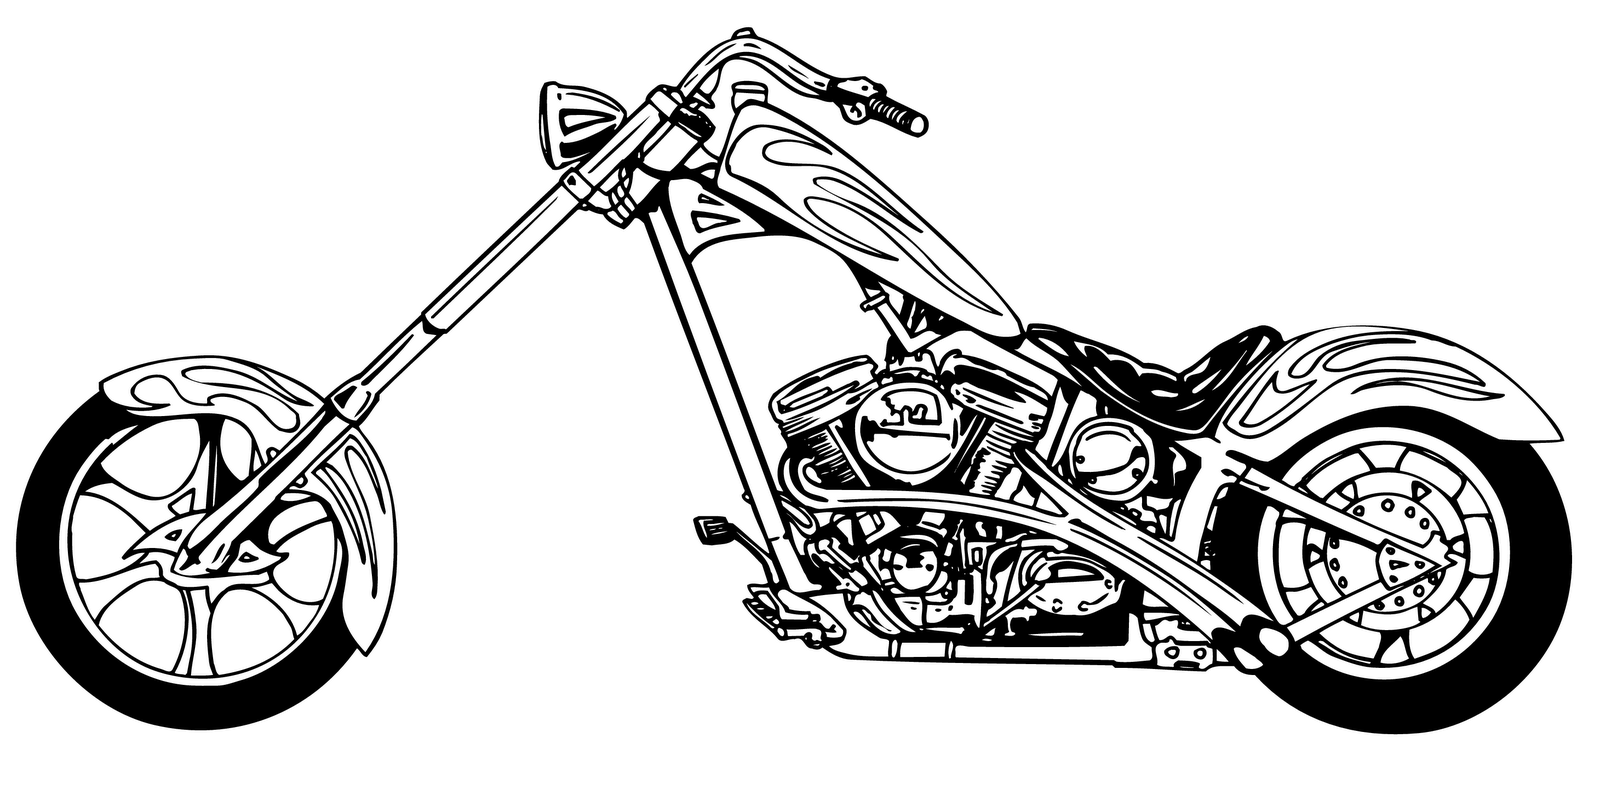 motorcycle clipart images art